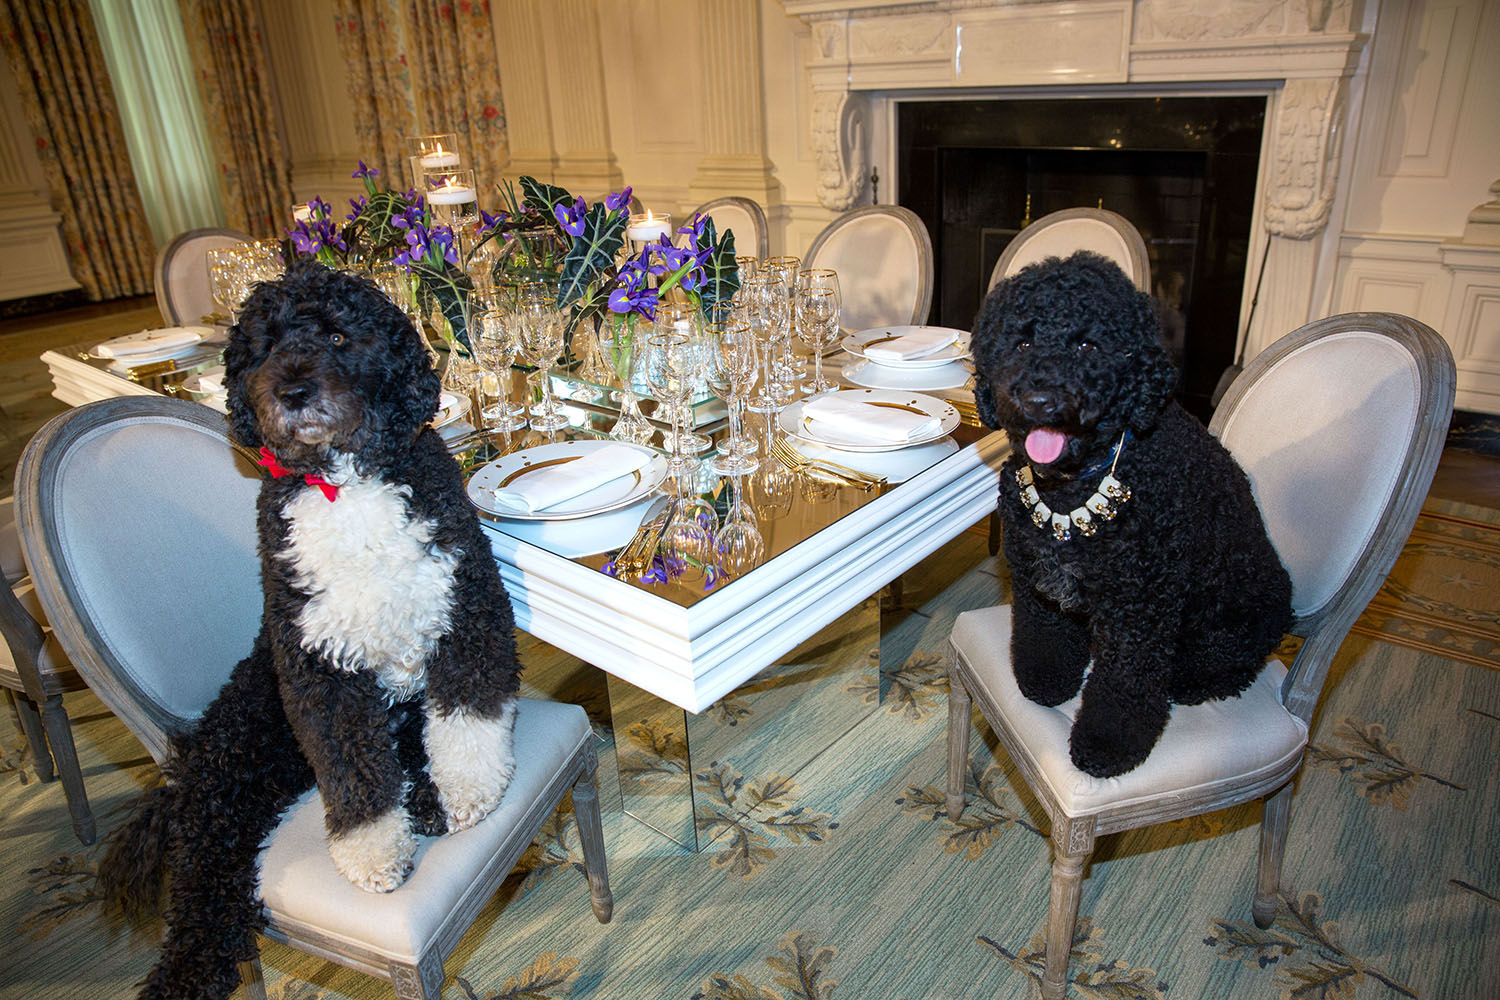 Obama family pets Bo, left, and Sunny sit at a table in the State Dining Room of the White House, Feb. 10, 2014. The table settings will be used at the State Dinner for President François Hollande of France.